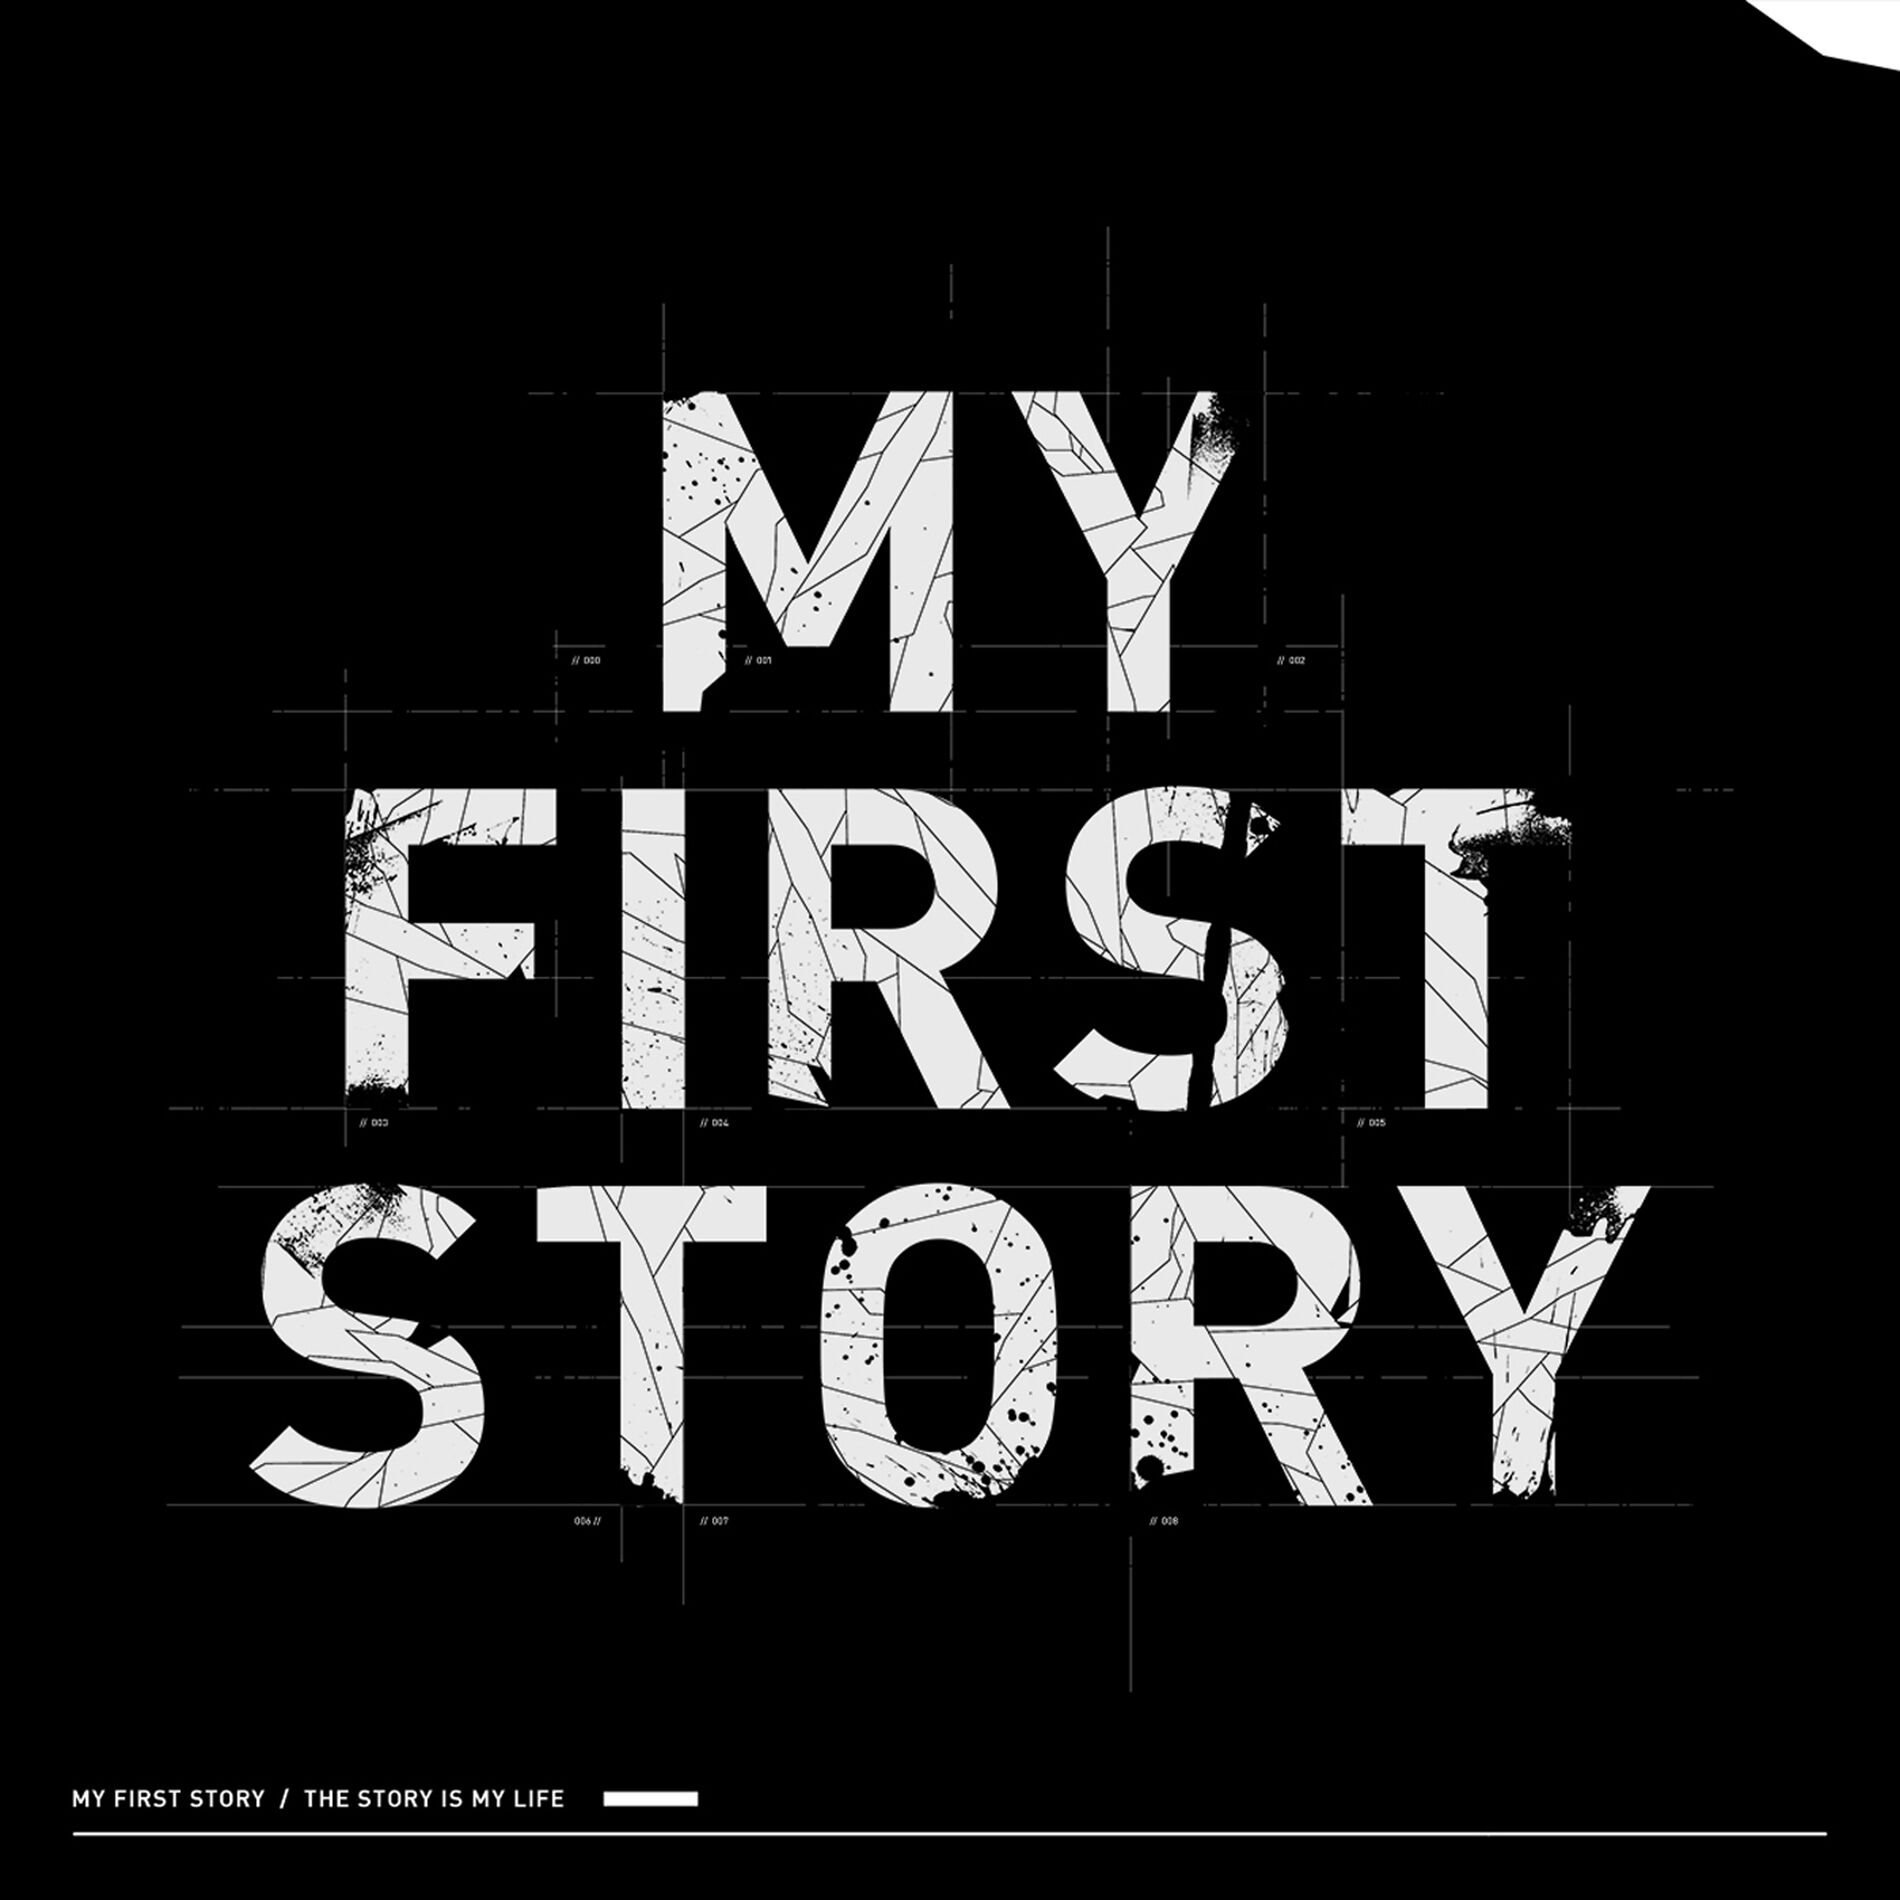 MY FIRST STORY: albums, songs, playlists | Listen on Deezer